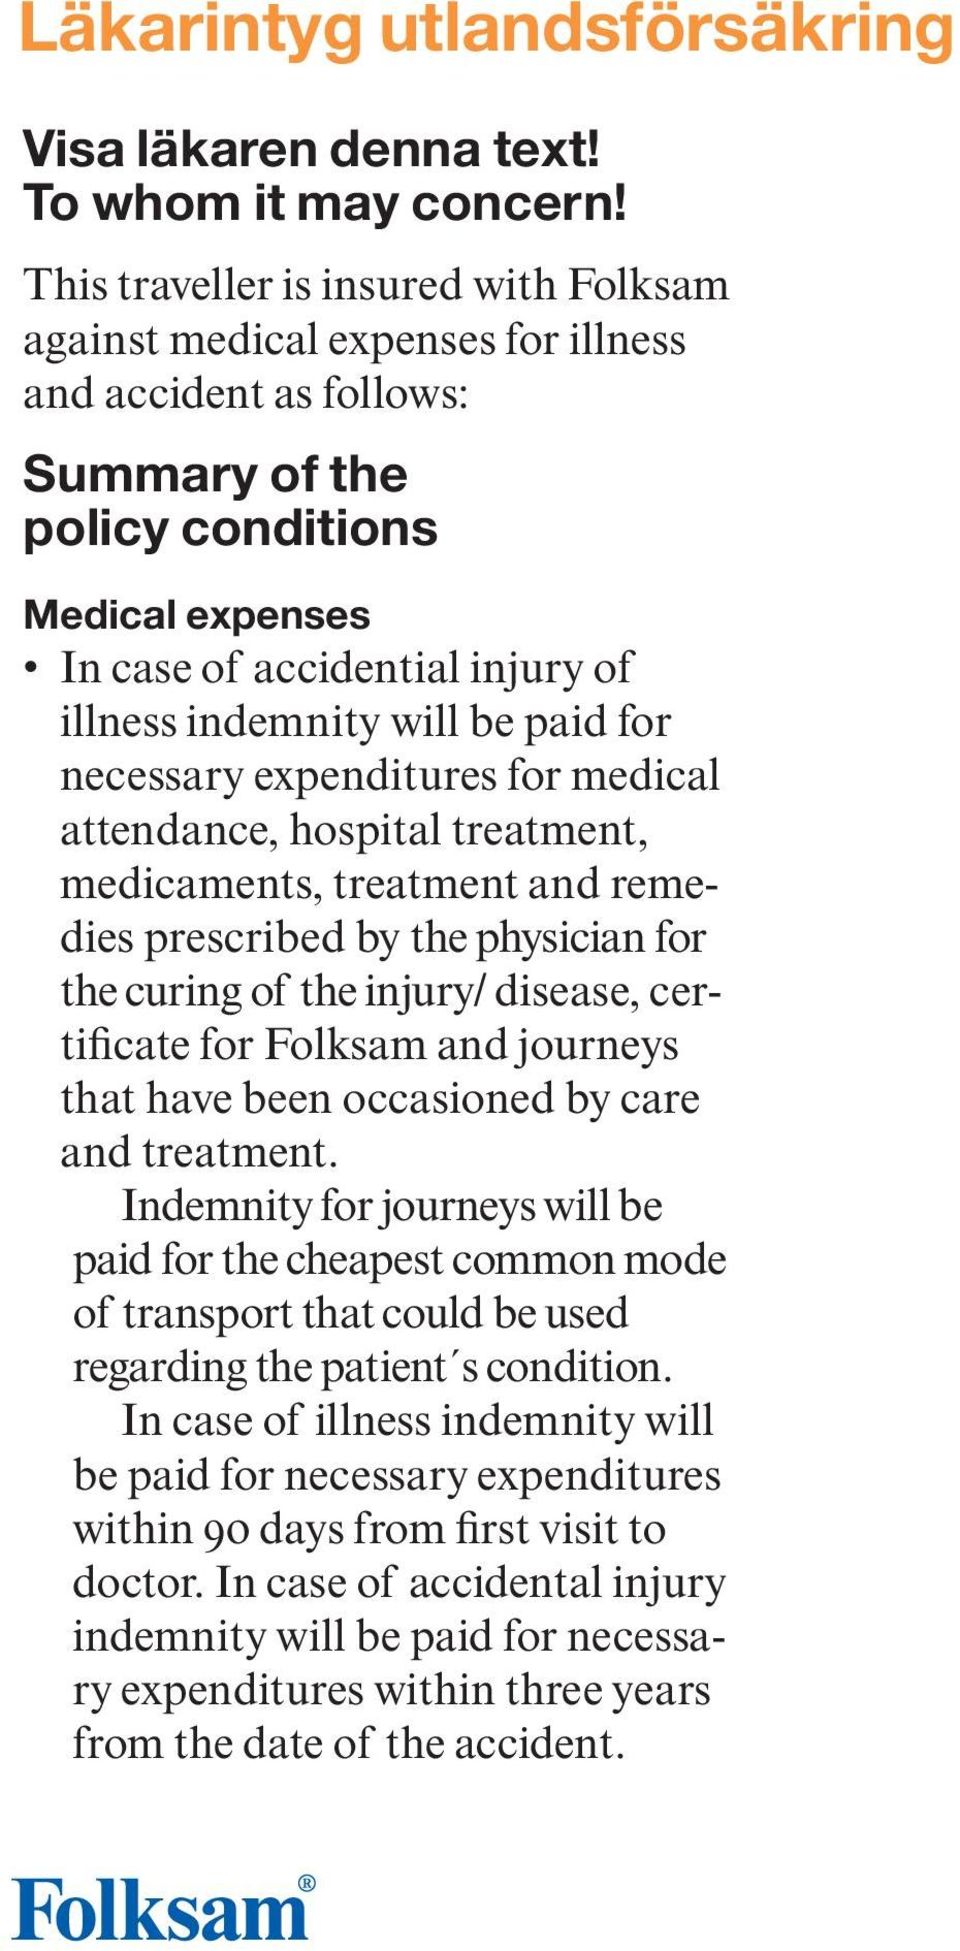 indemnity will be paid for necessary expenditures for medical attendance, hospital treatment, medicaments, treatment and remedies prescribed by the physician for the curing of the injury/ disease,